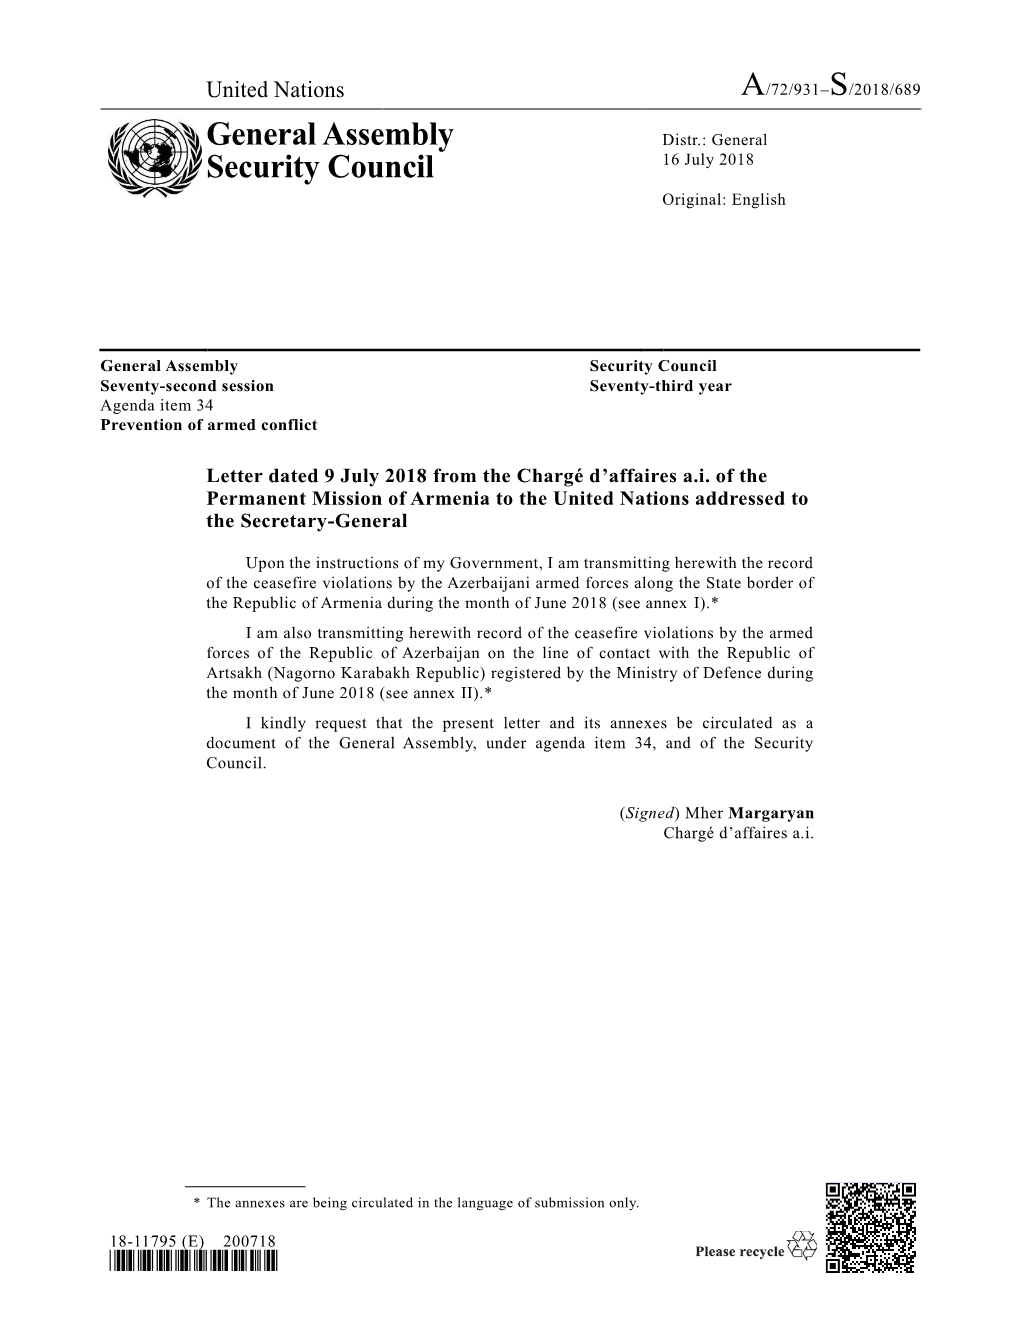 General Assembly Security Council Seventy-Second Session Seventy-Third Year Agenda Item 34 Prevention of Armed Conflict